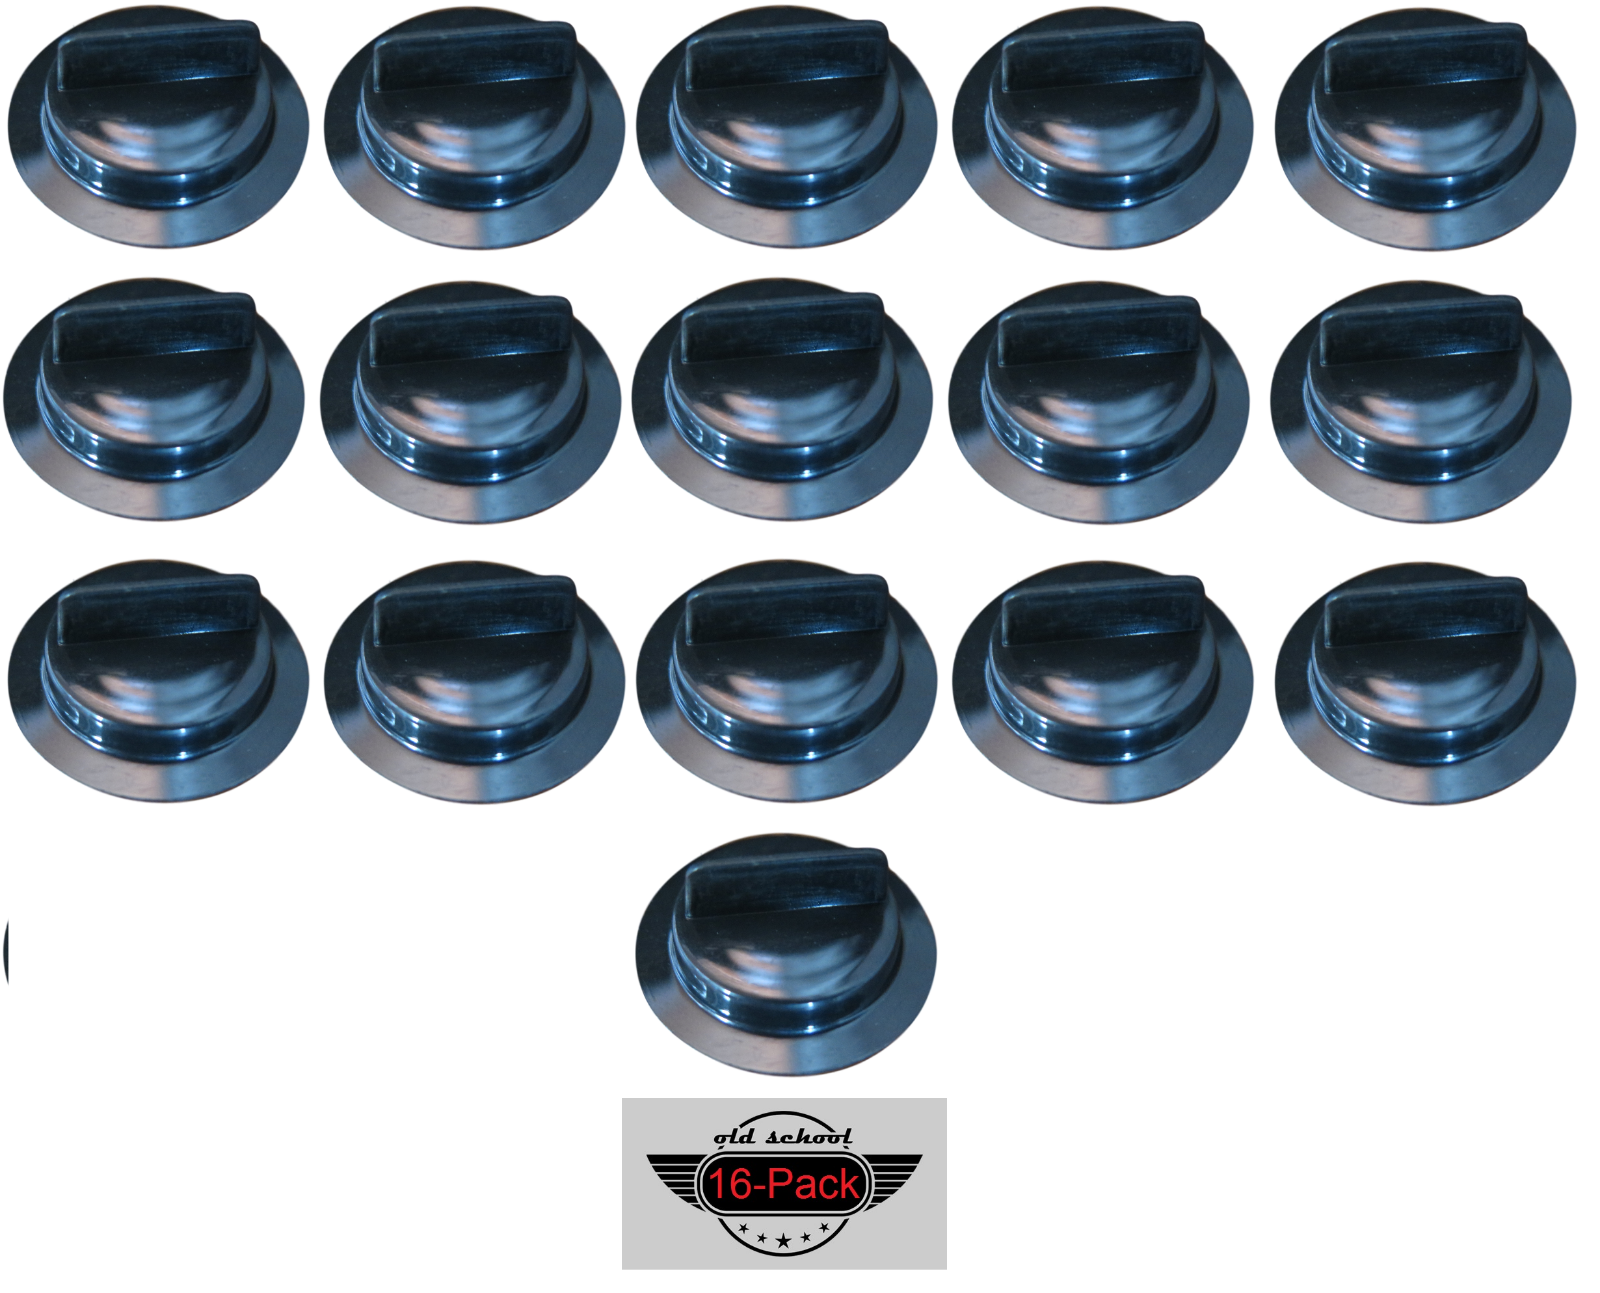 16x NEW STOPPER CAPS Gas Can Gott,Rubbermaid Essence,Igloo,Midwest,Scepter,Eagle - $55.09